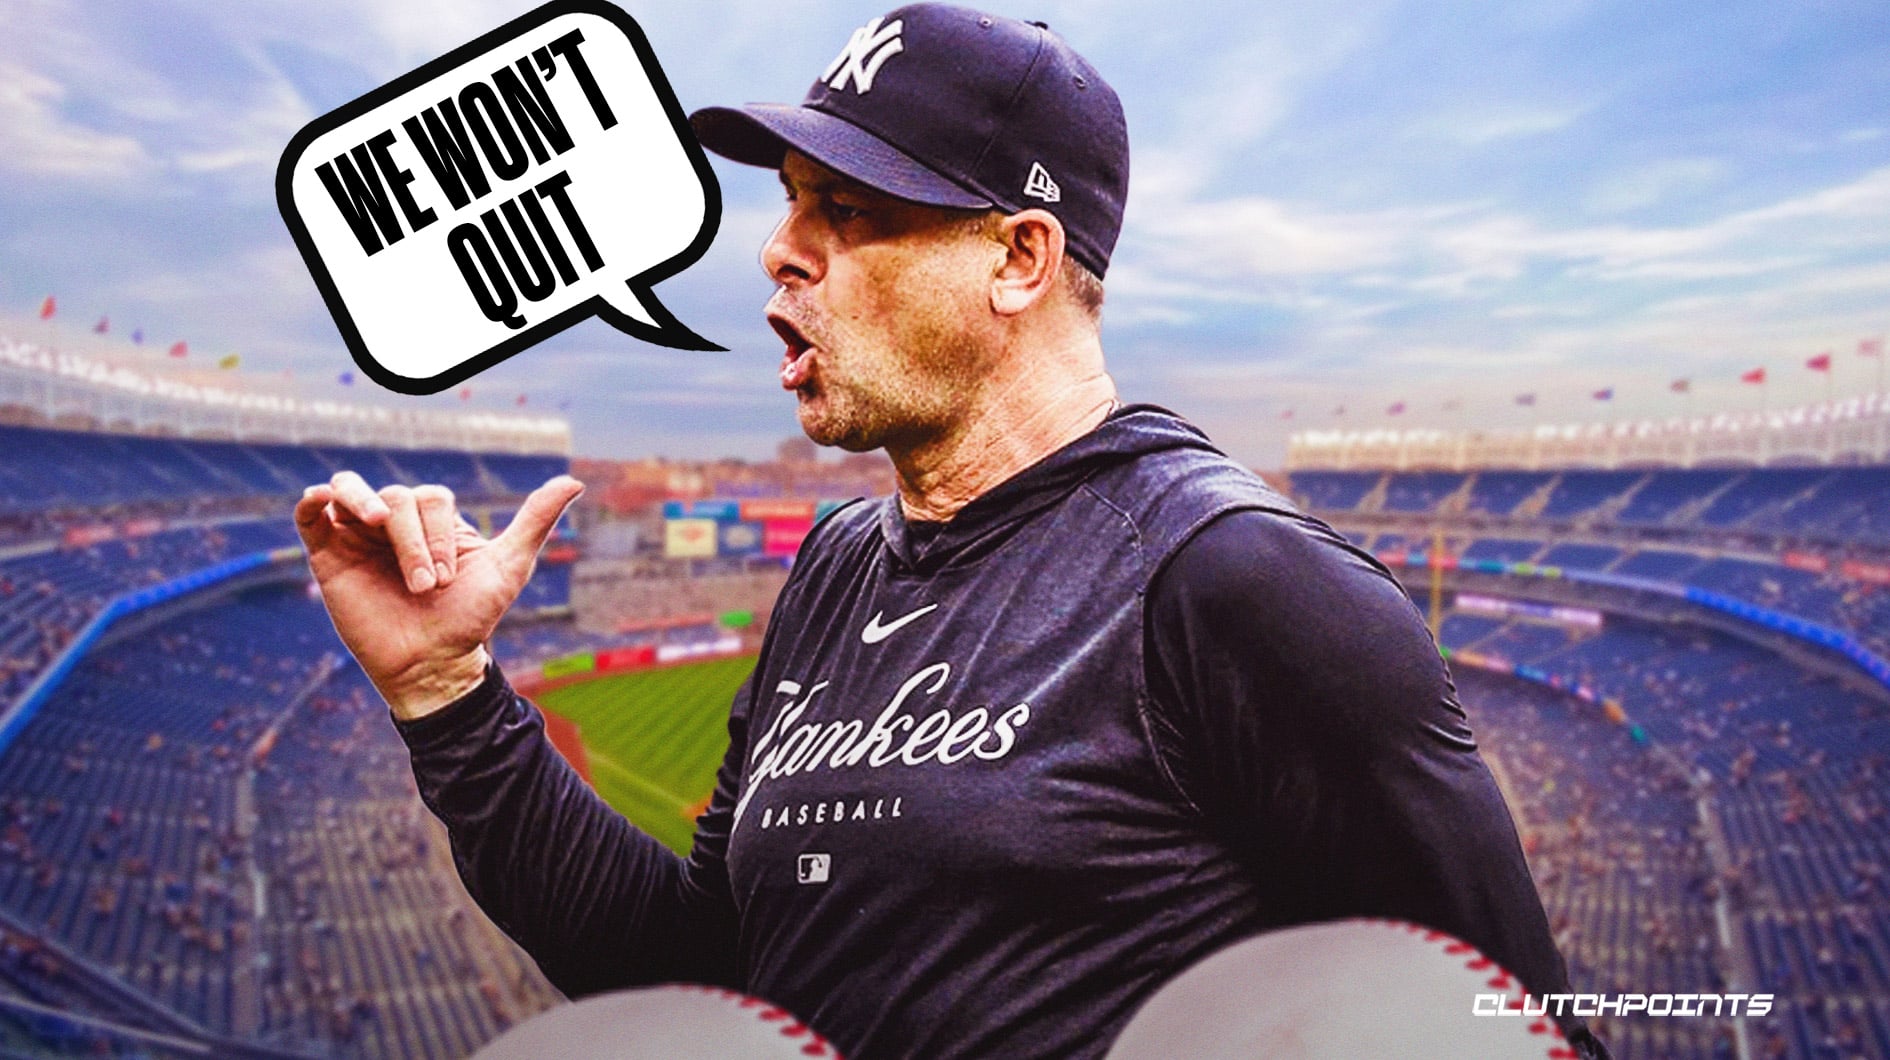 Aaron Boone's brutally honest stance amid Yankees' ice cold skid